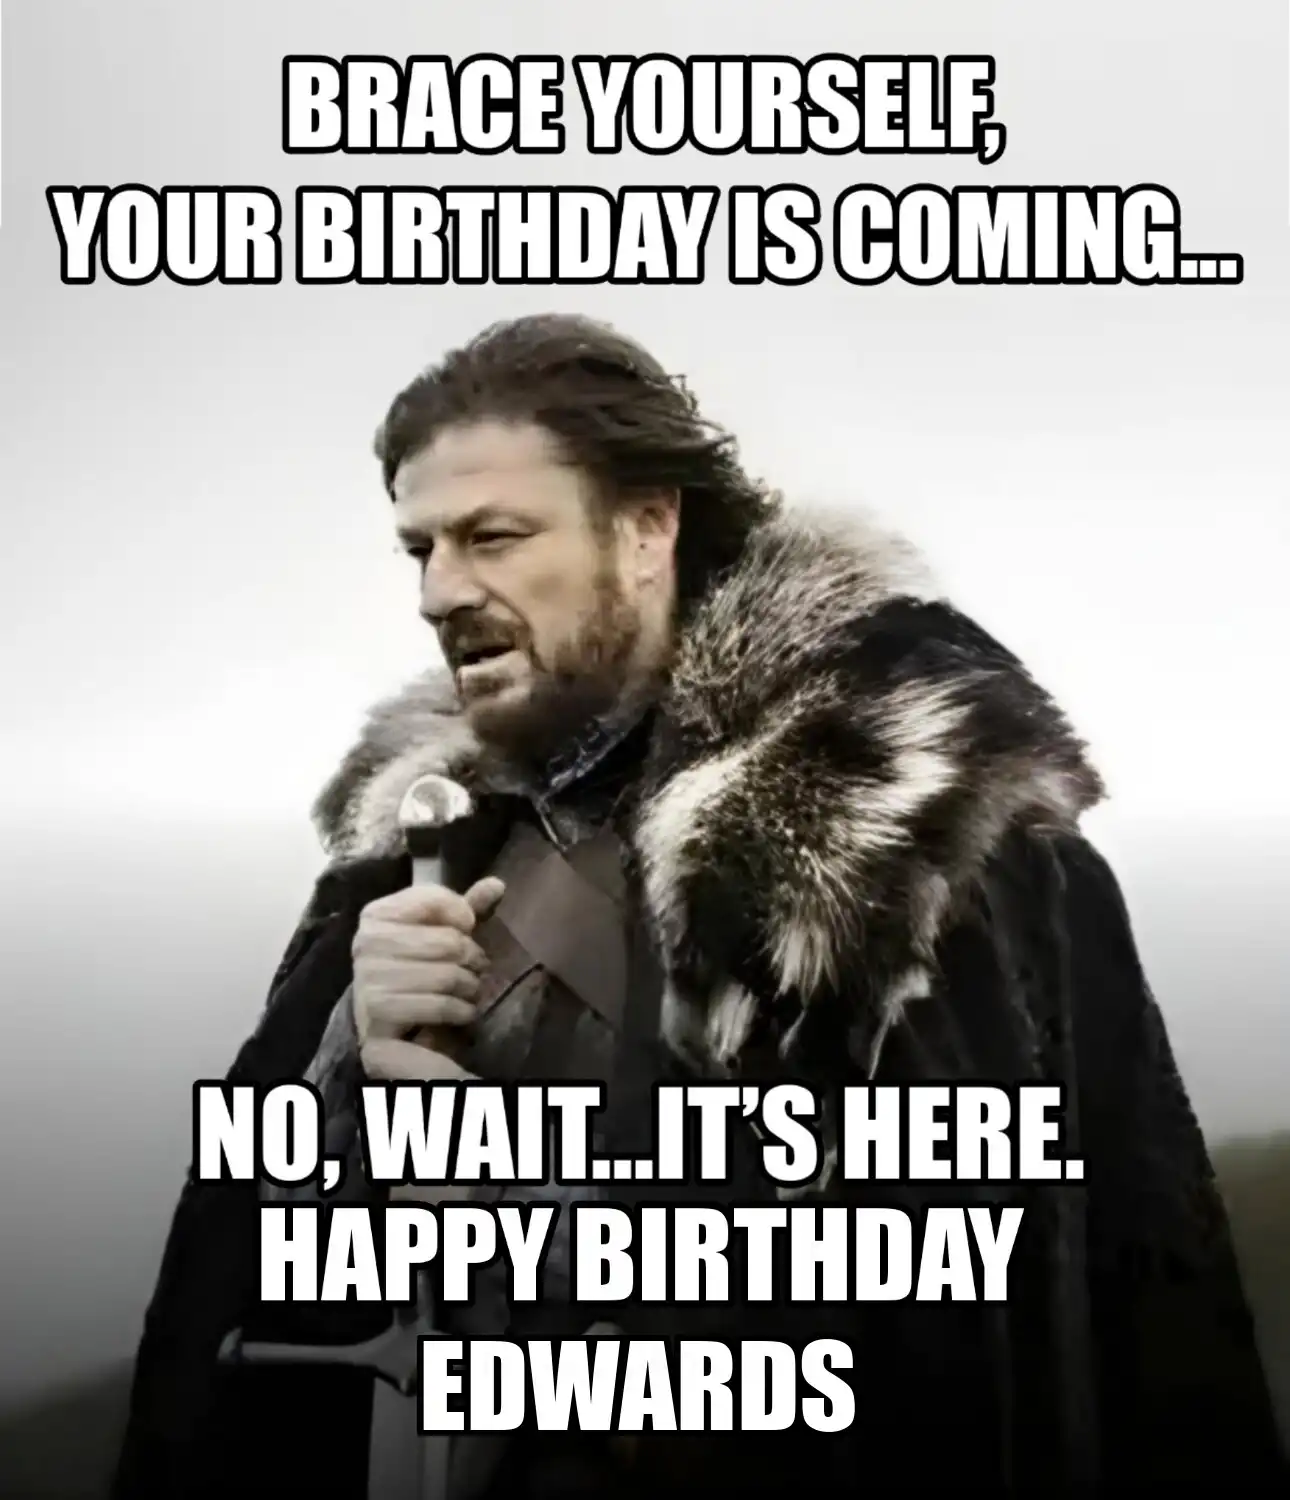 Happy Birthday Edwards Brace Yourself Your Birthday Is Coming Meme